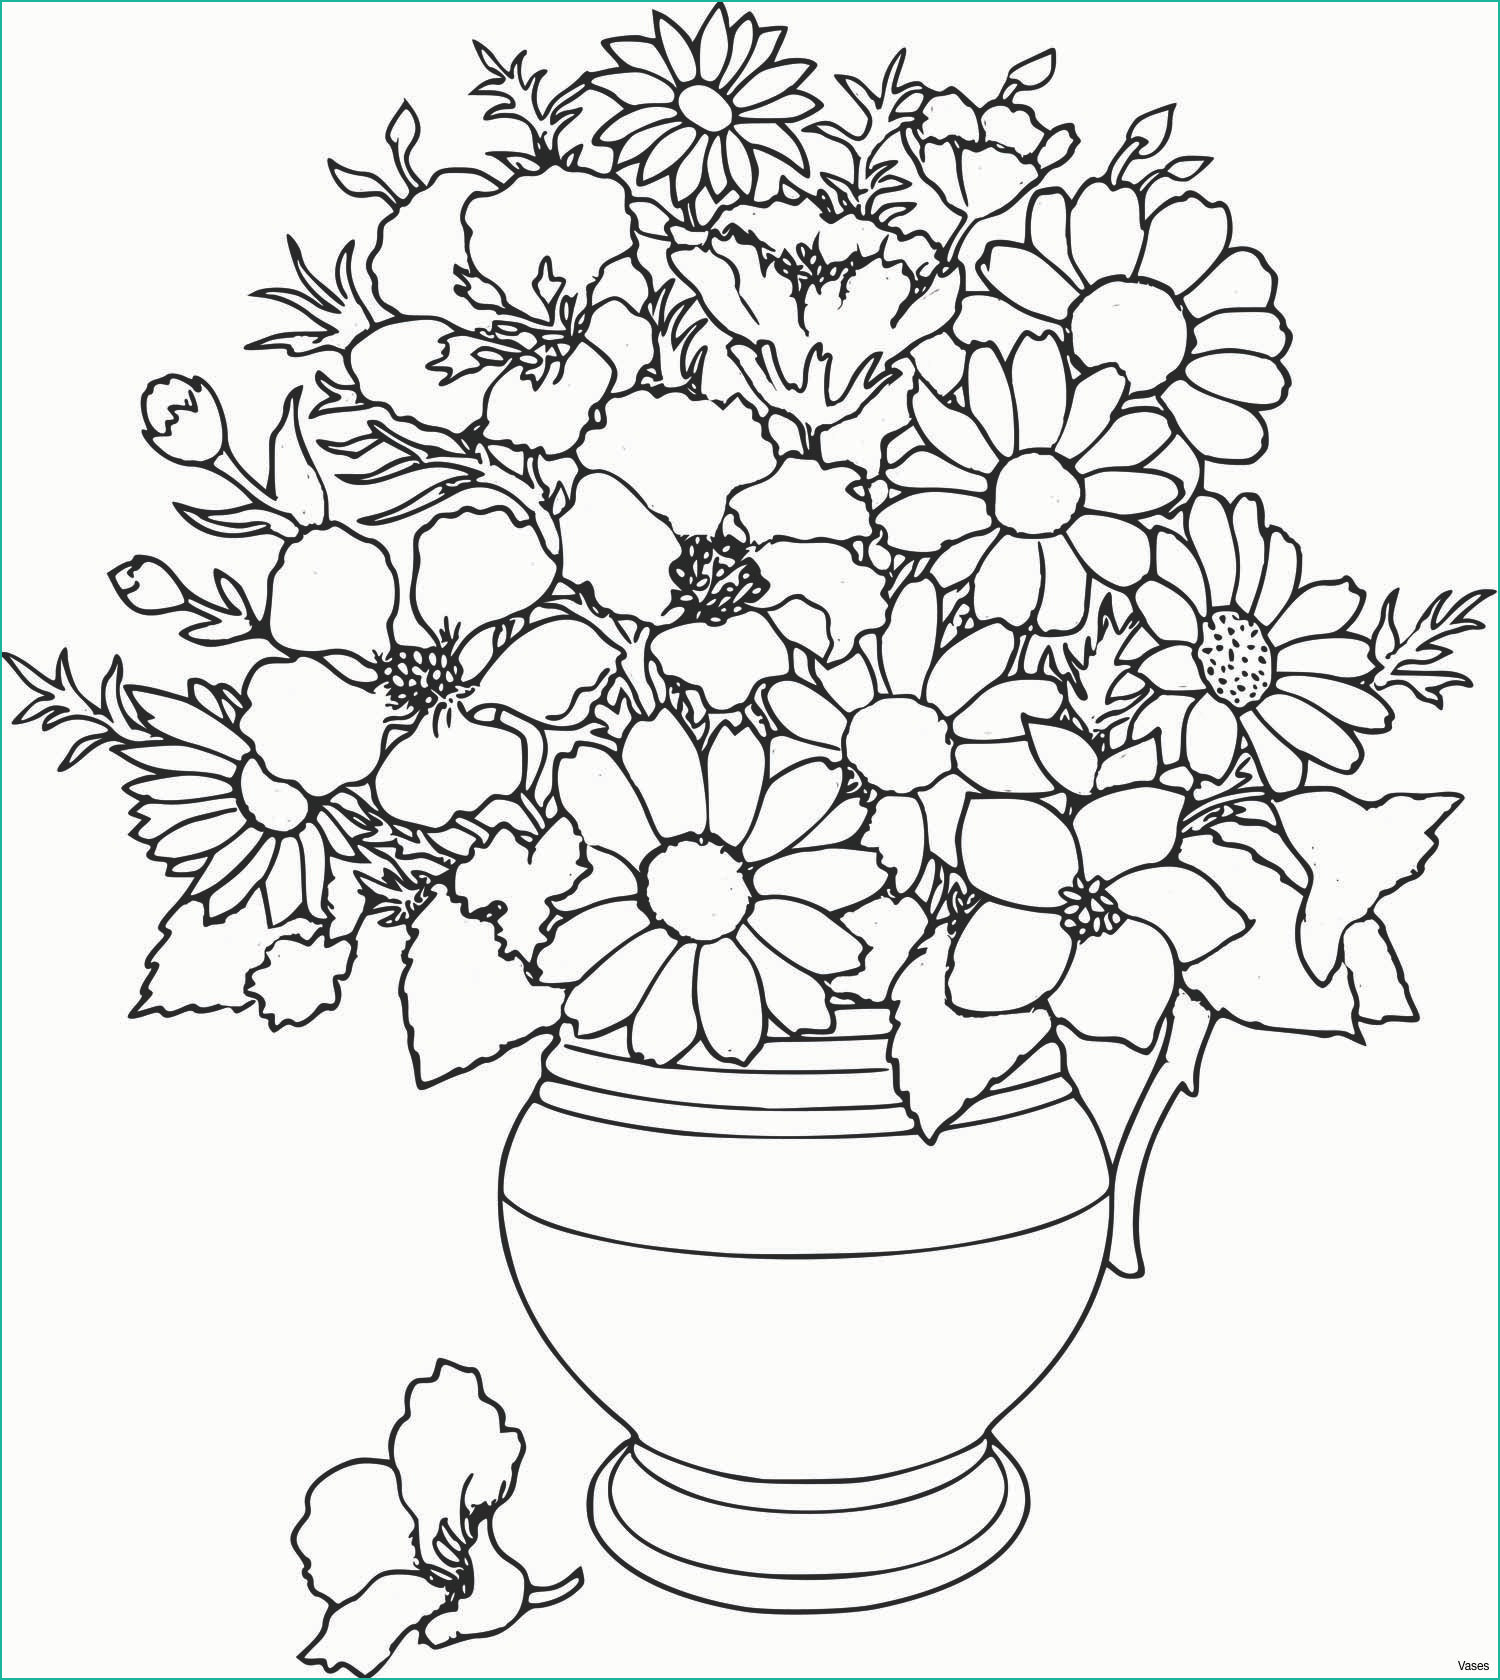 Coloring Pages Of Crosses With Flowers Free Printable Embroidery Patterns Enticing 54 A Coloring Pages